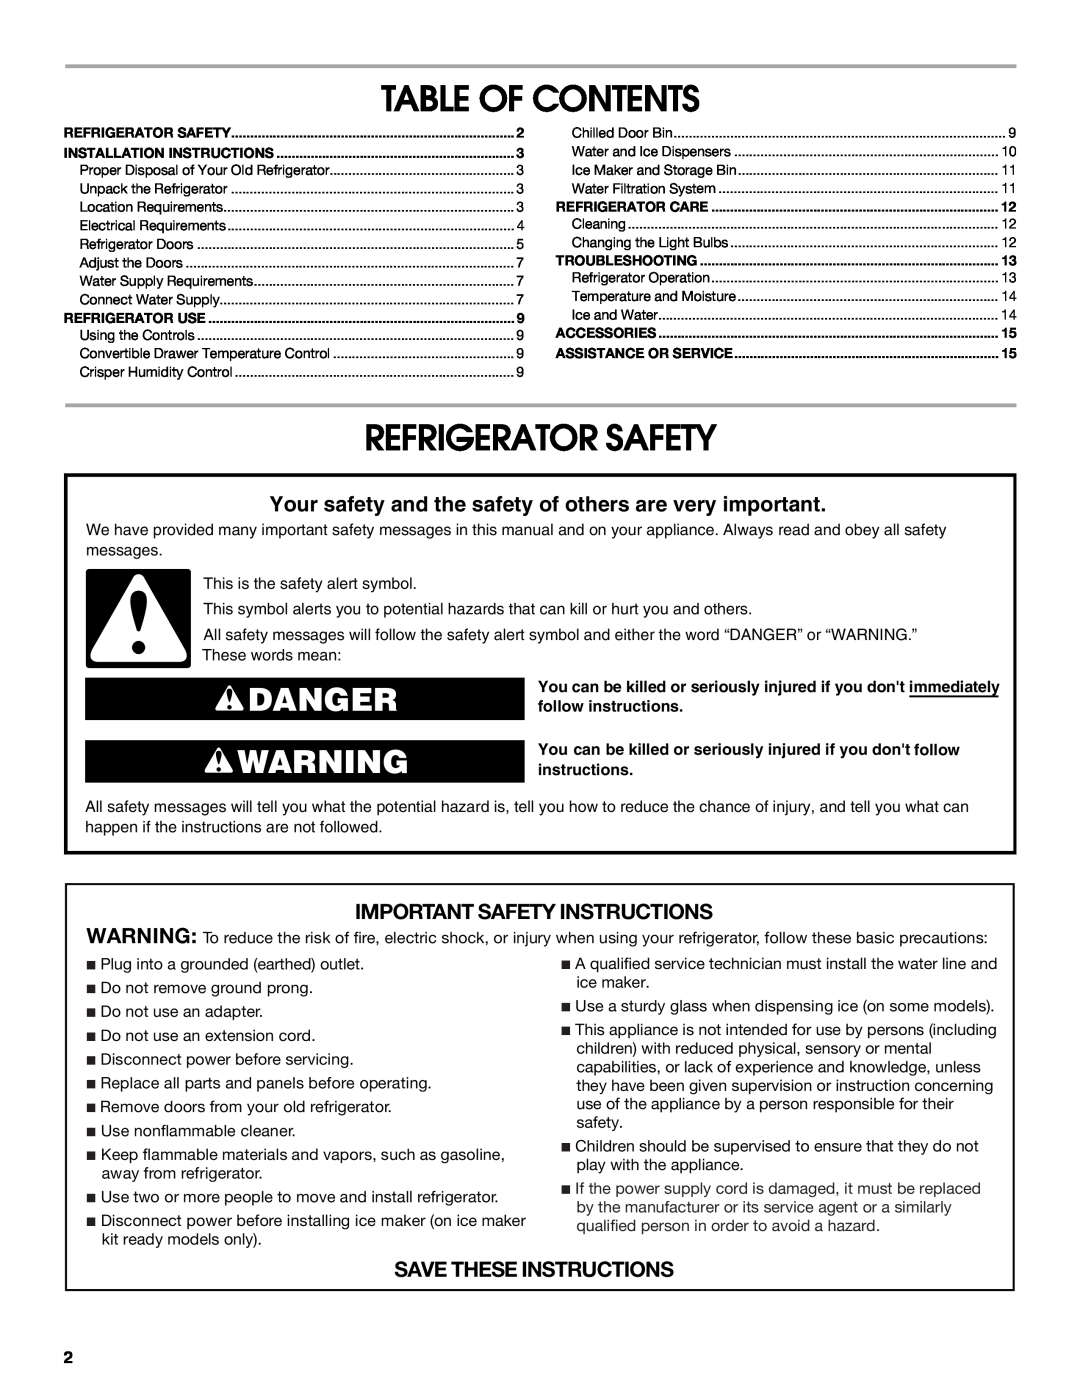 Whirlpool W10266784A manual Table Of Contents, Refrigerator Safety, Danger, Important Safety Instructions 